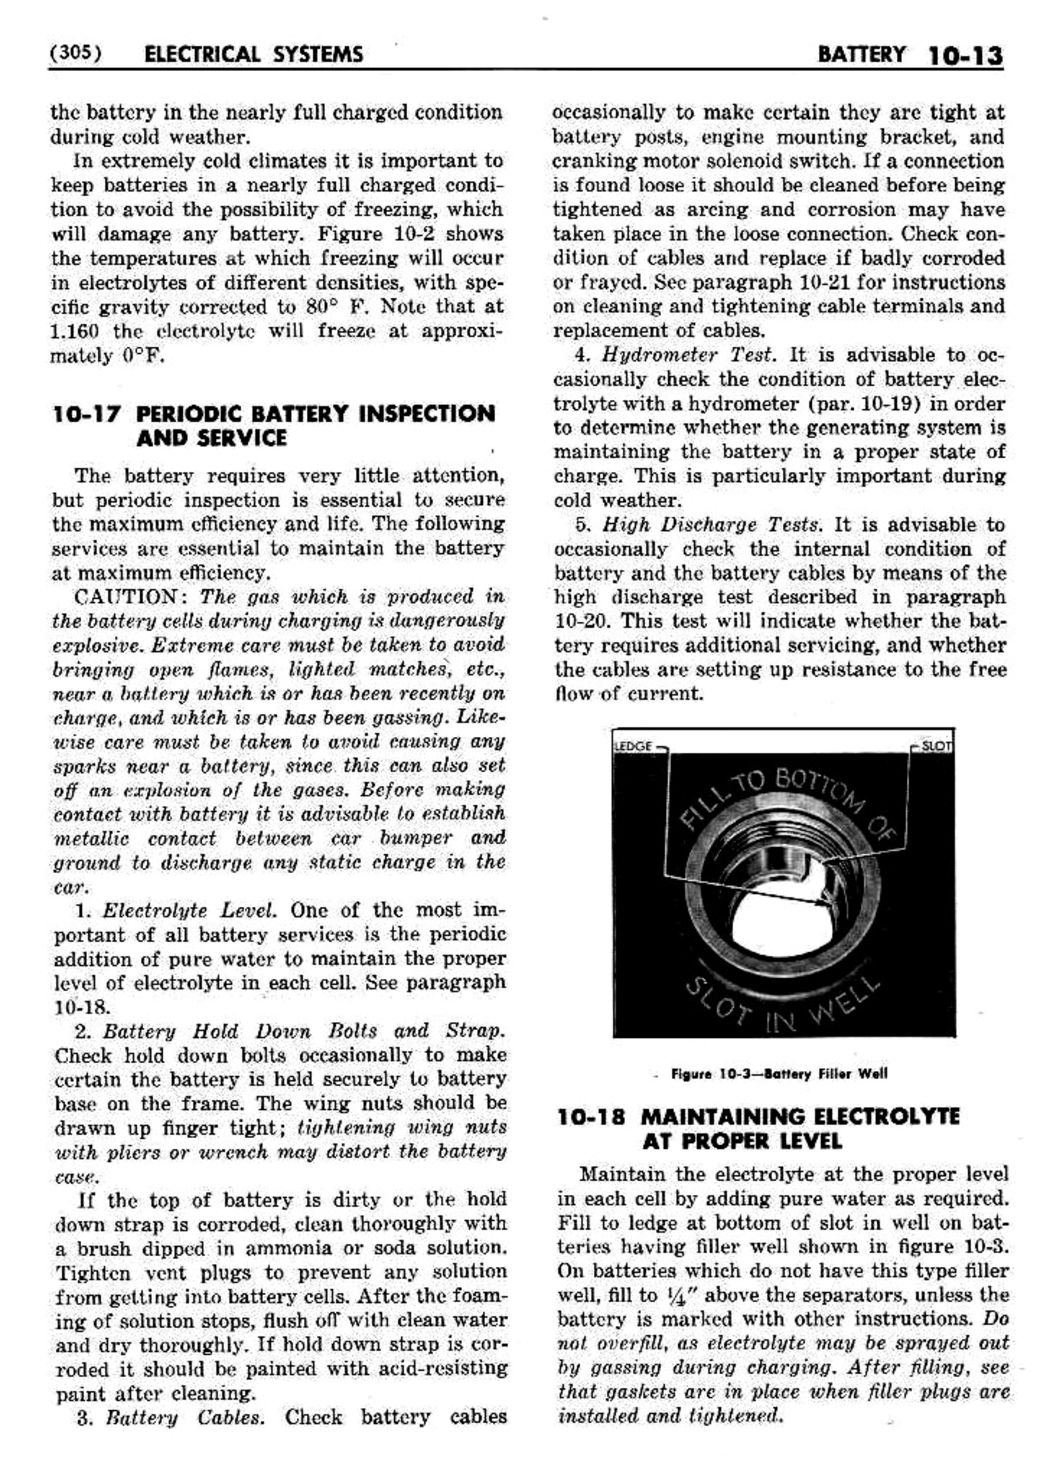 n_11 1951 Buick Shop Manual - Electrical Systems-013-013.jpg